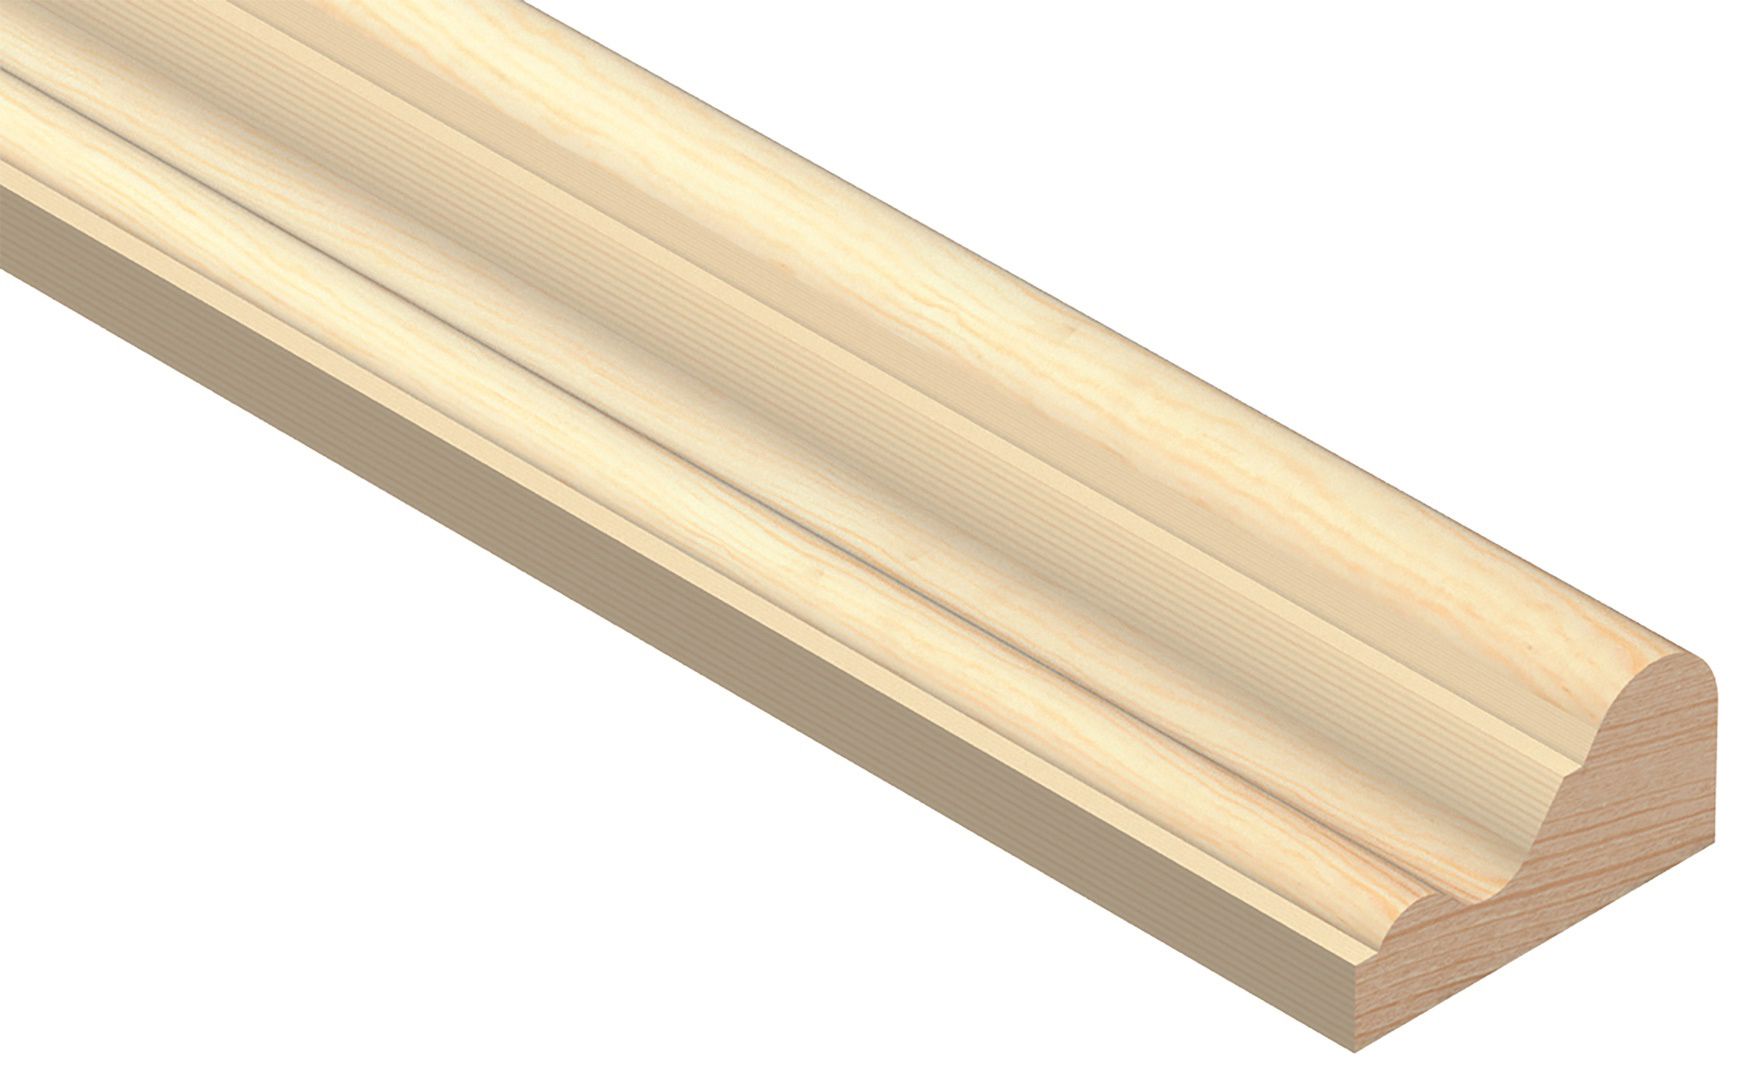 Image of Wickes Pine Decorative Cover Moulding - 29 x15 x 2400mm